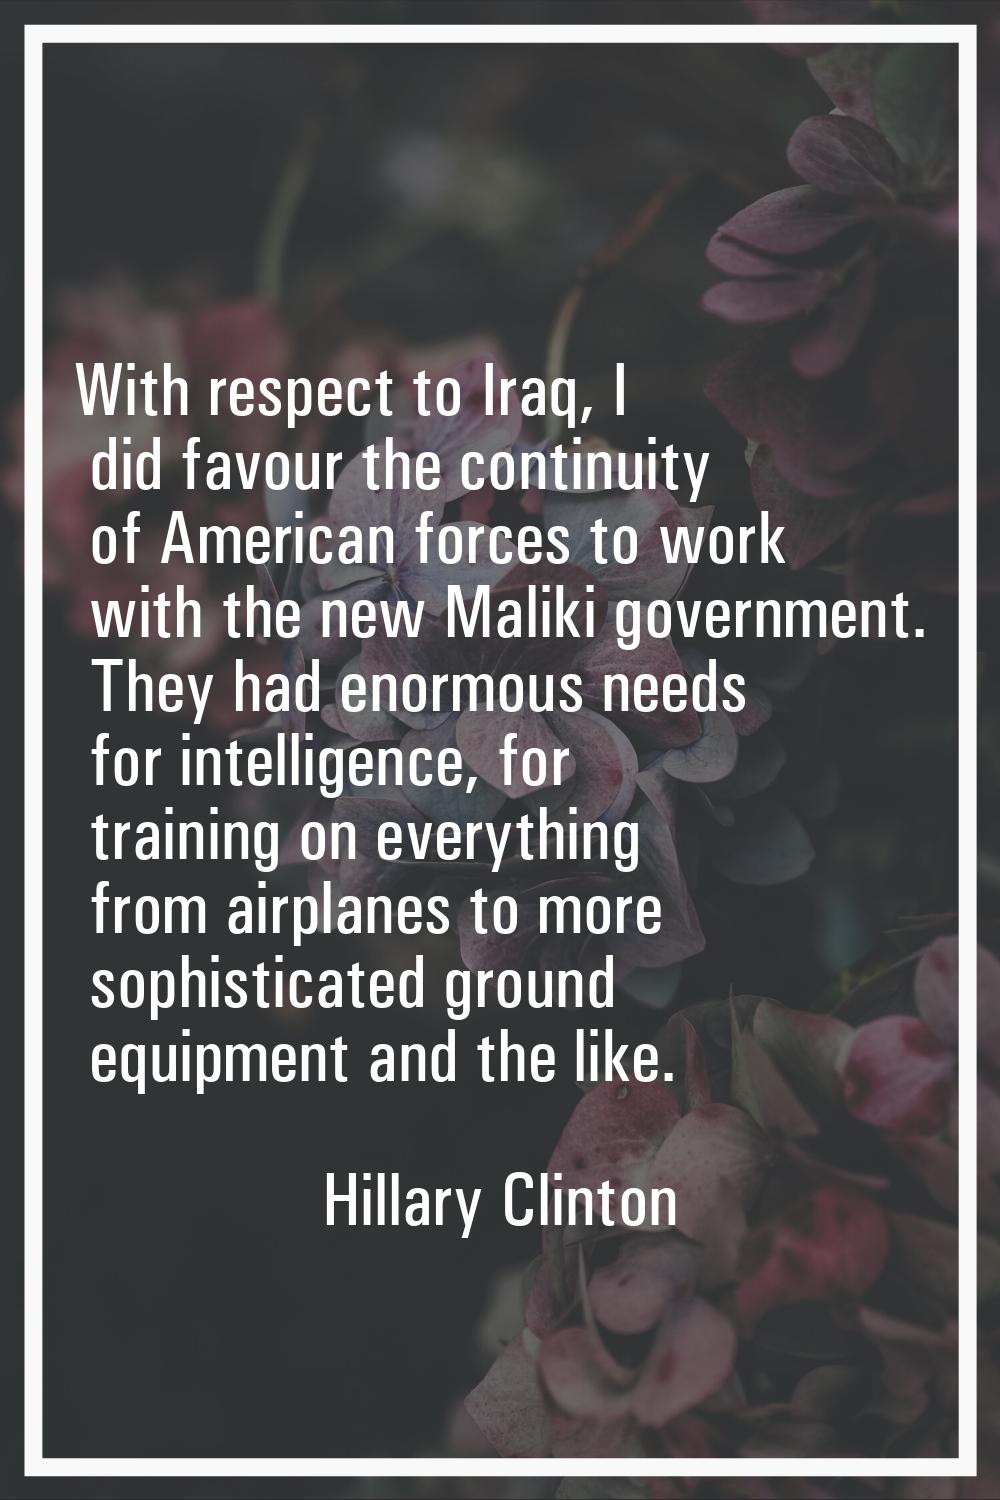 With respect to Iraq, I did favour the continuity of American forces to work with the new Maliki go